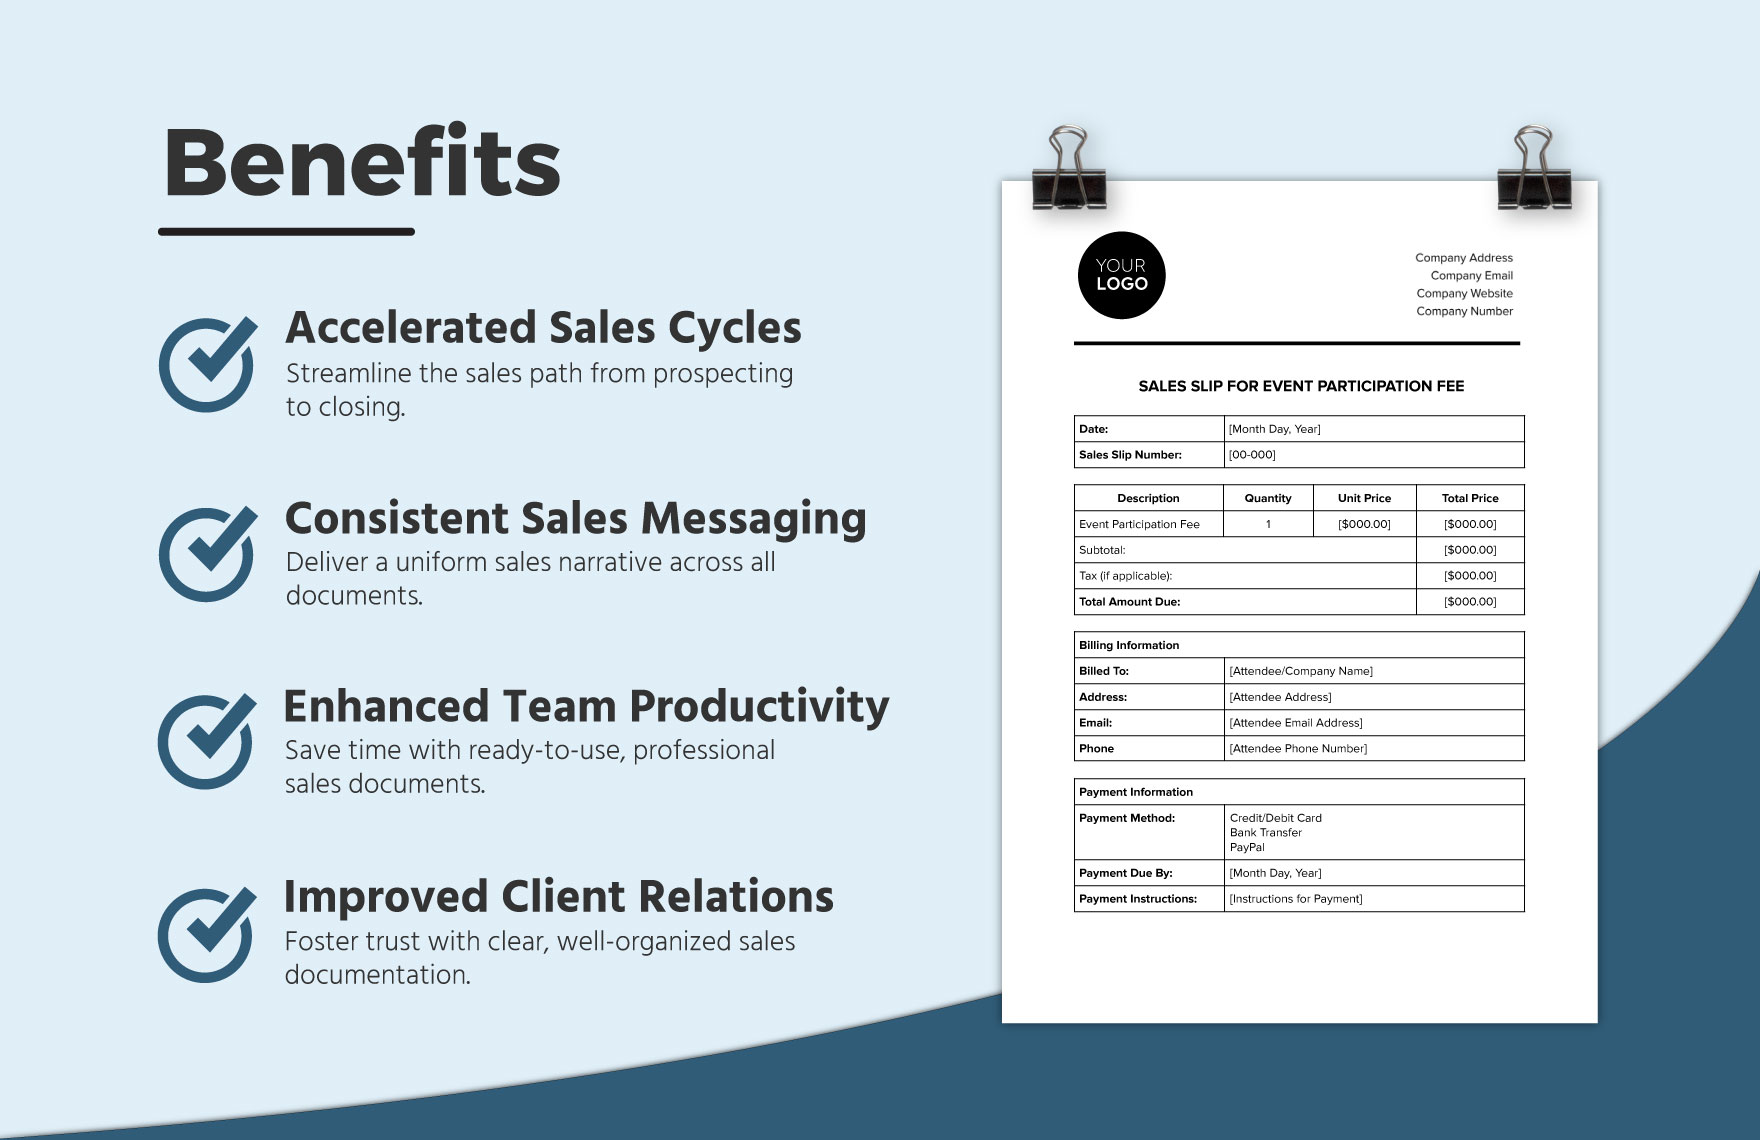 Sales Slip for Event Participation Fee Template